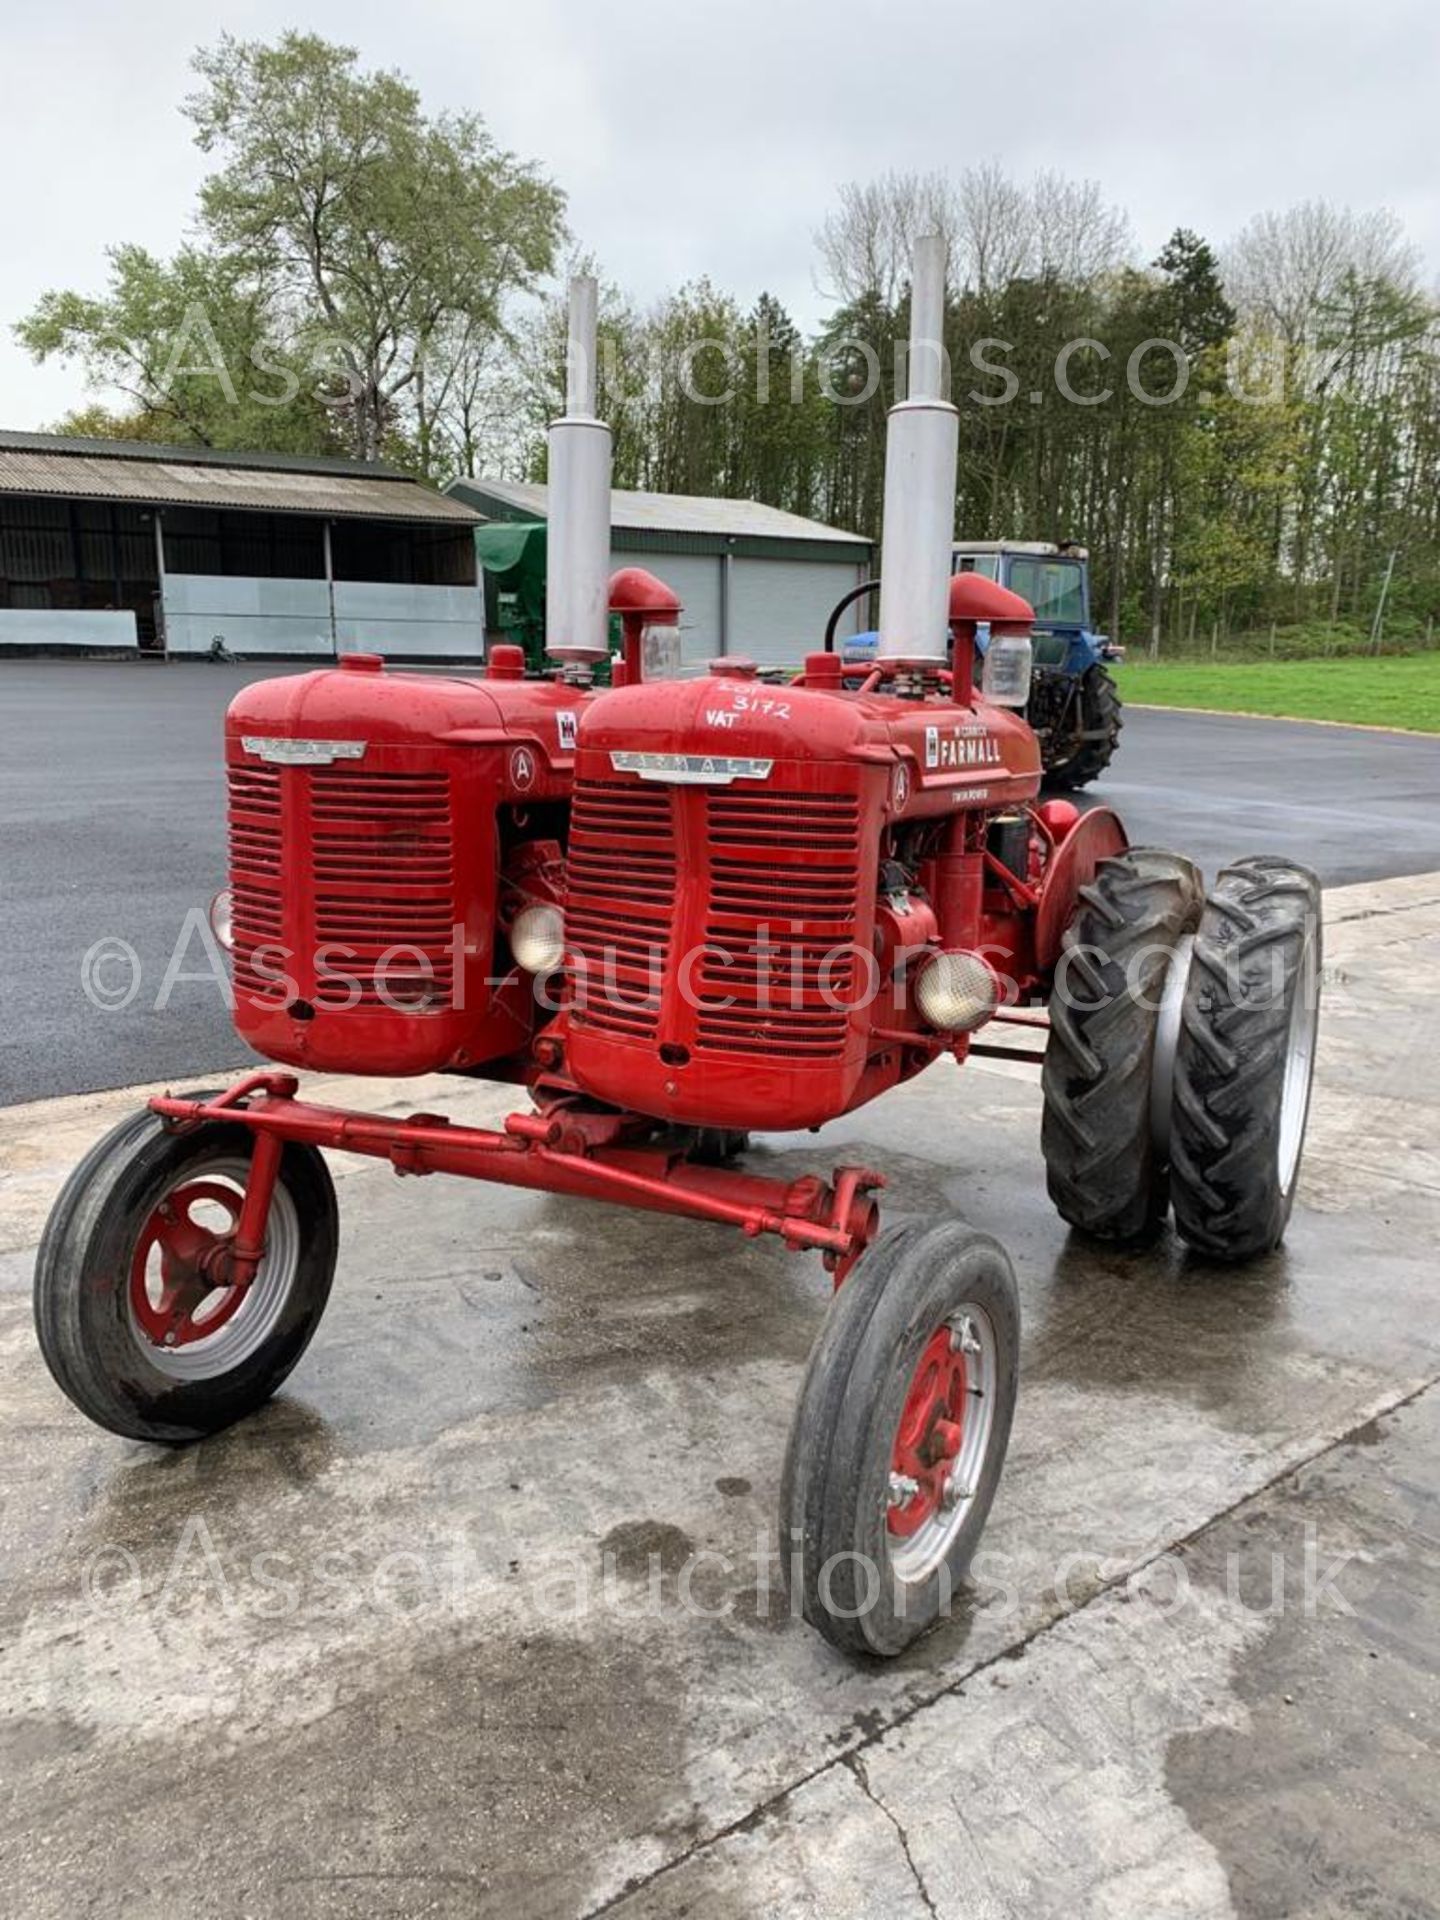 McCORMICK FARMALL A SERIES TWIN ENGINED TRACTOR, RUNS, DRIVES AND WORKS *PLUS VAT* - Image 5 of 18